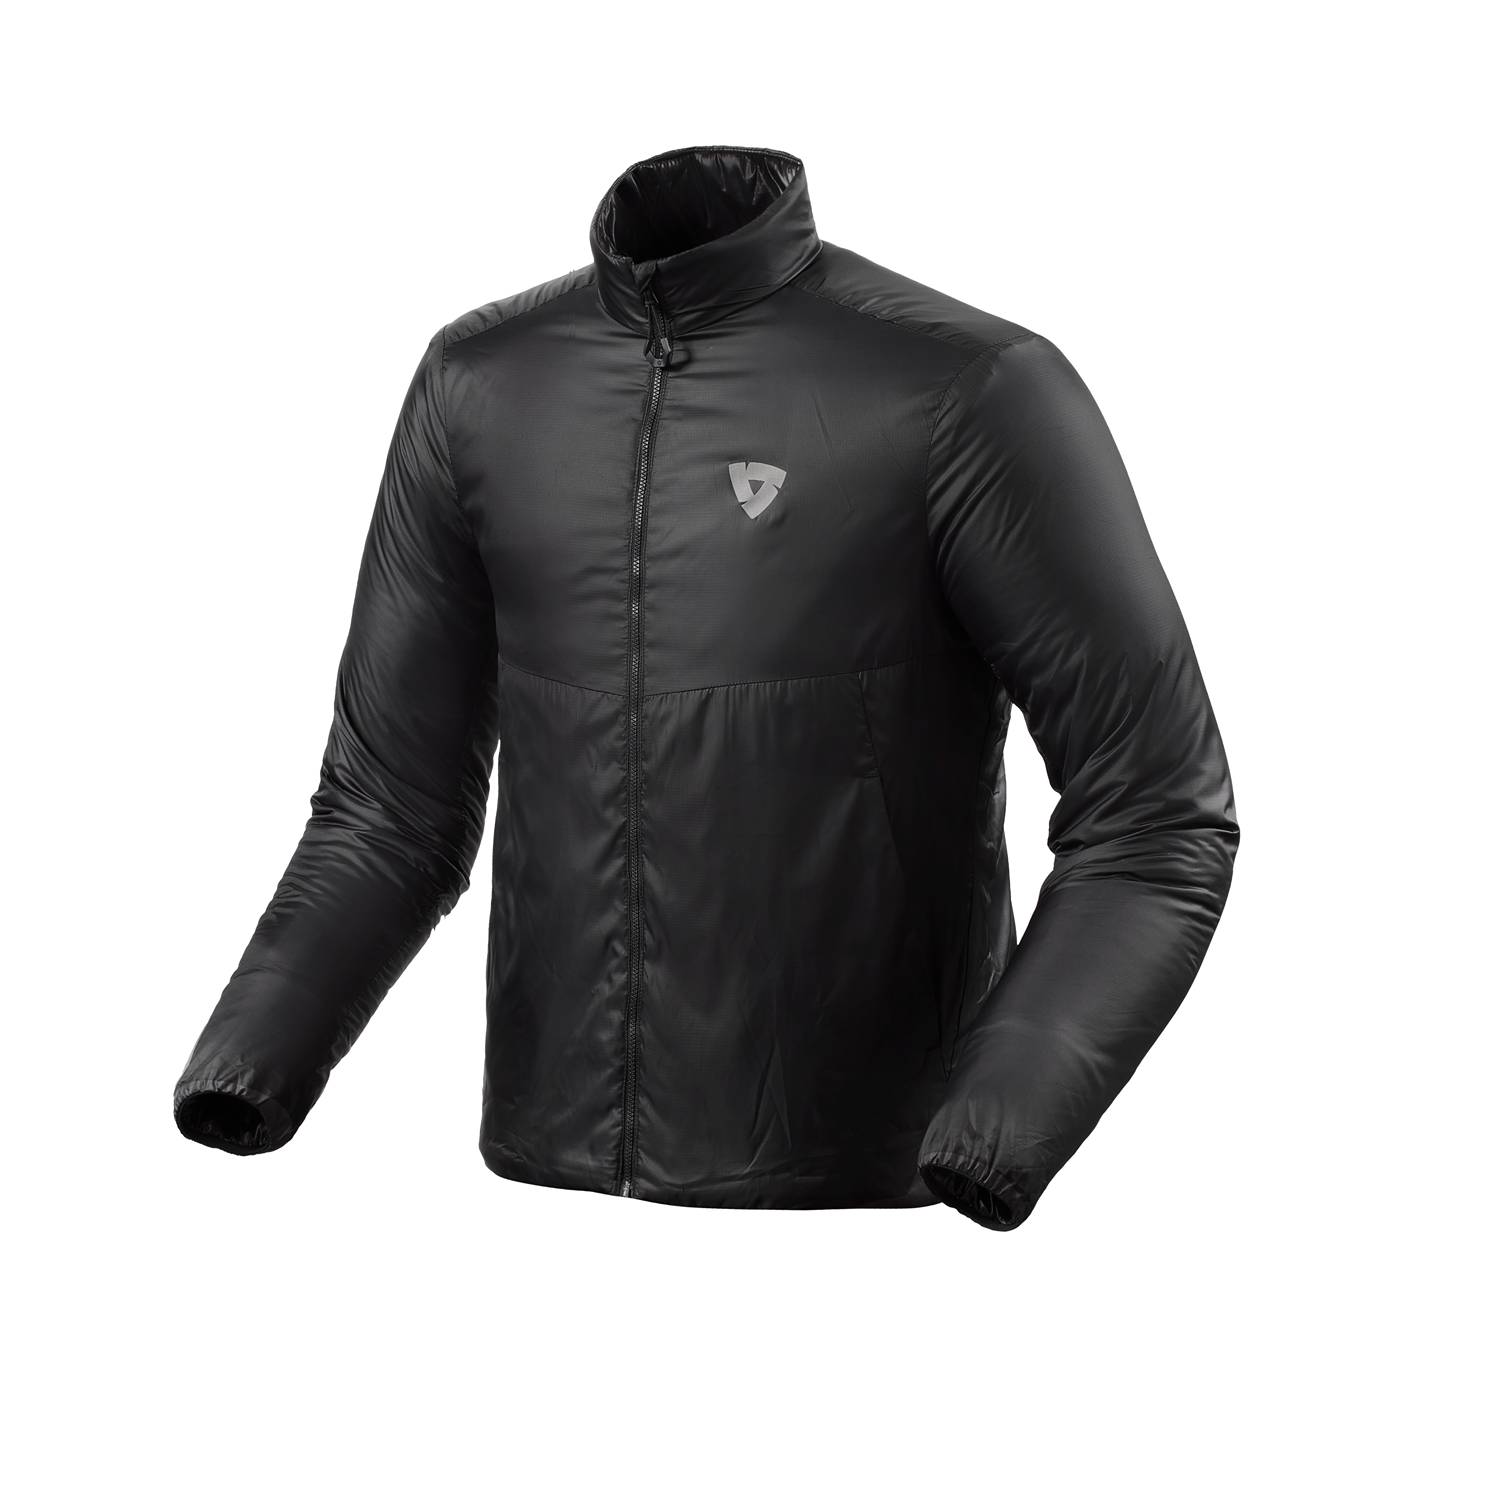 Image of REV'IT! Core 2 Mid Layer Jacket Black Taille 2XL